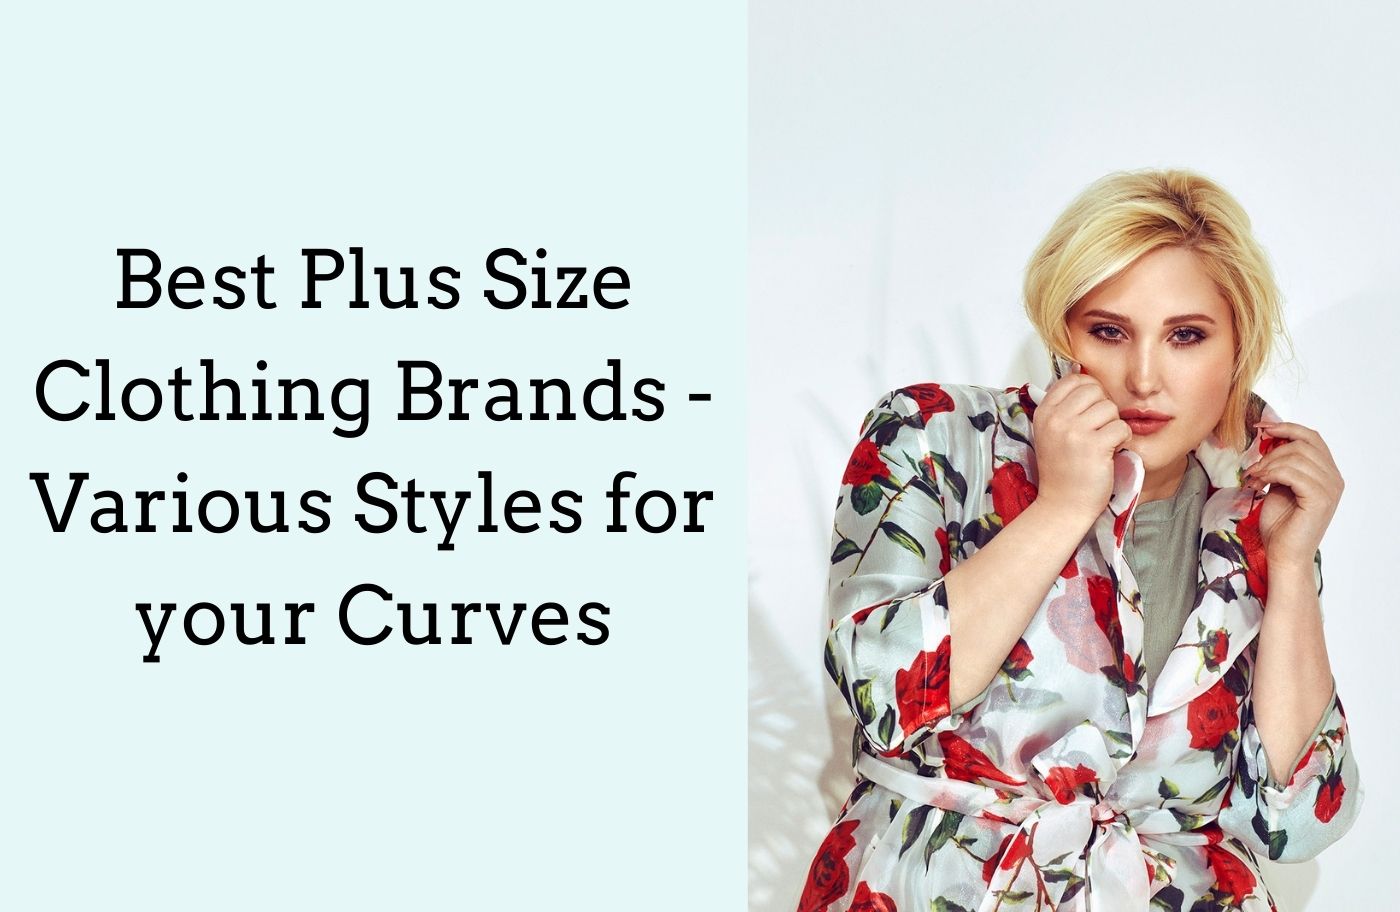 Best Plus Size Clothing Brands - Various Styles for your Curves